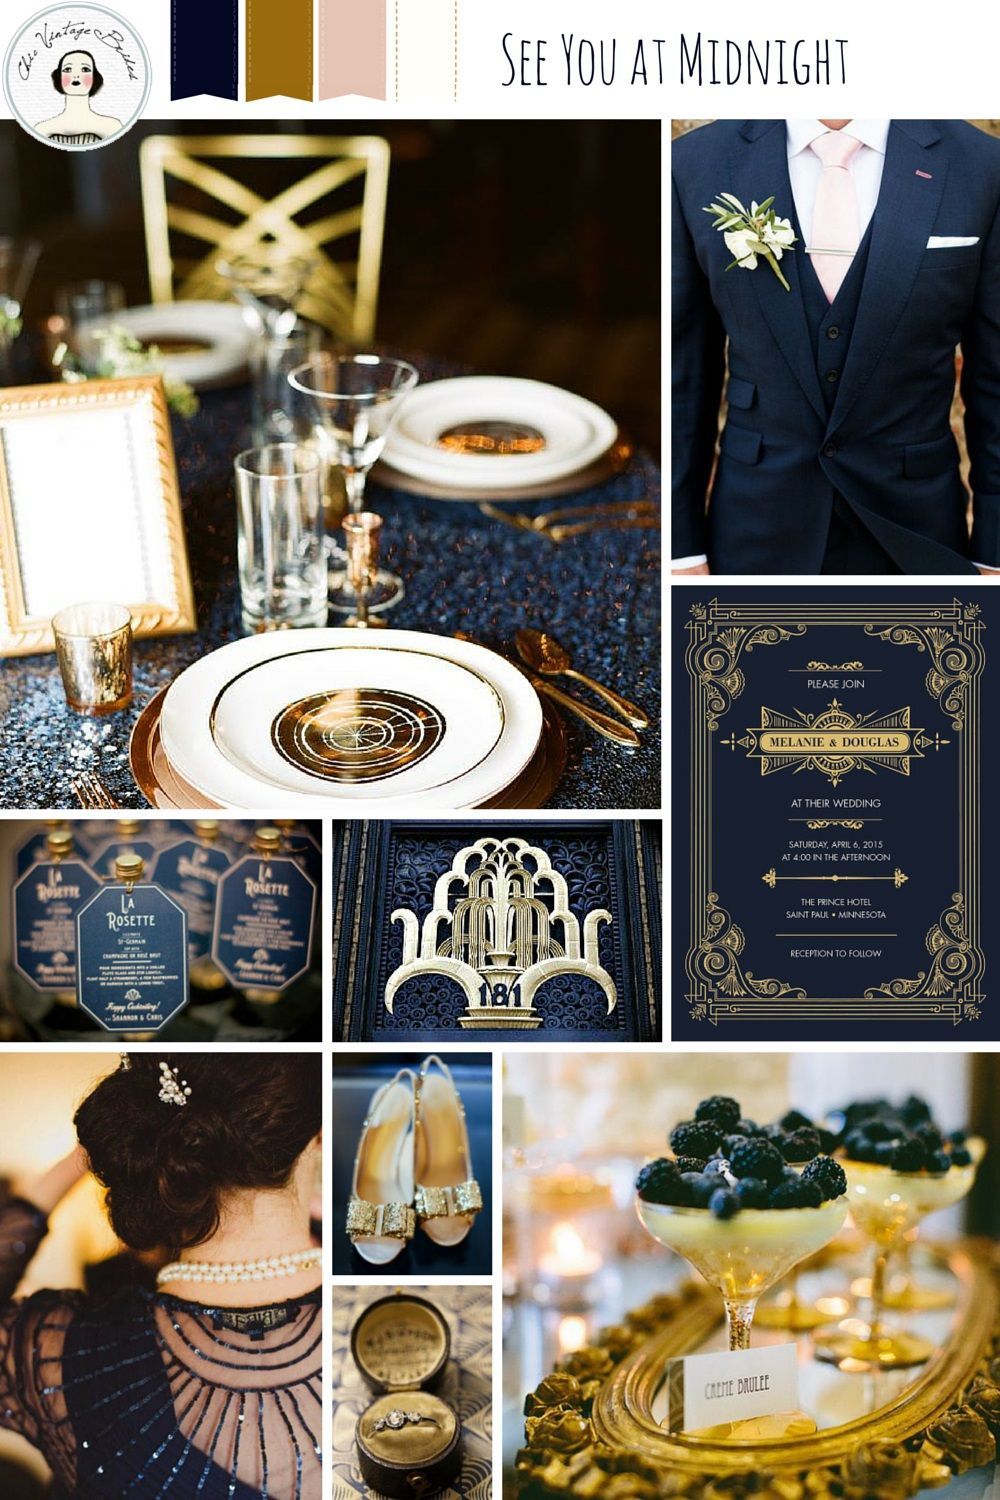 See You At Midnight – New Year’s Eve Wedding Inspiration in Midnight Blue and Gold